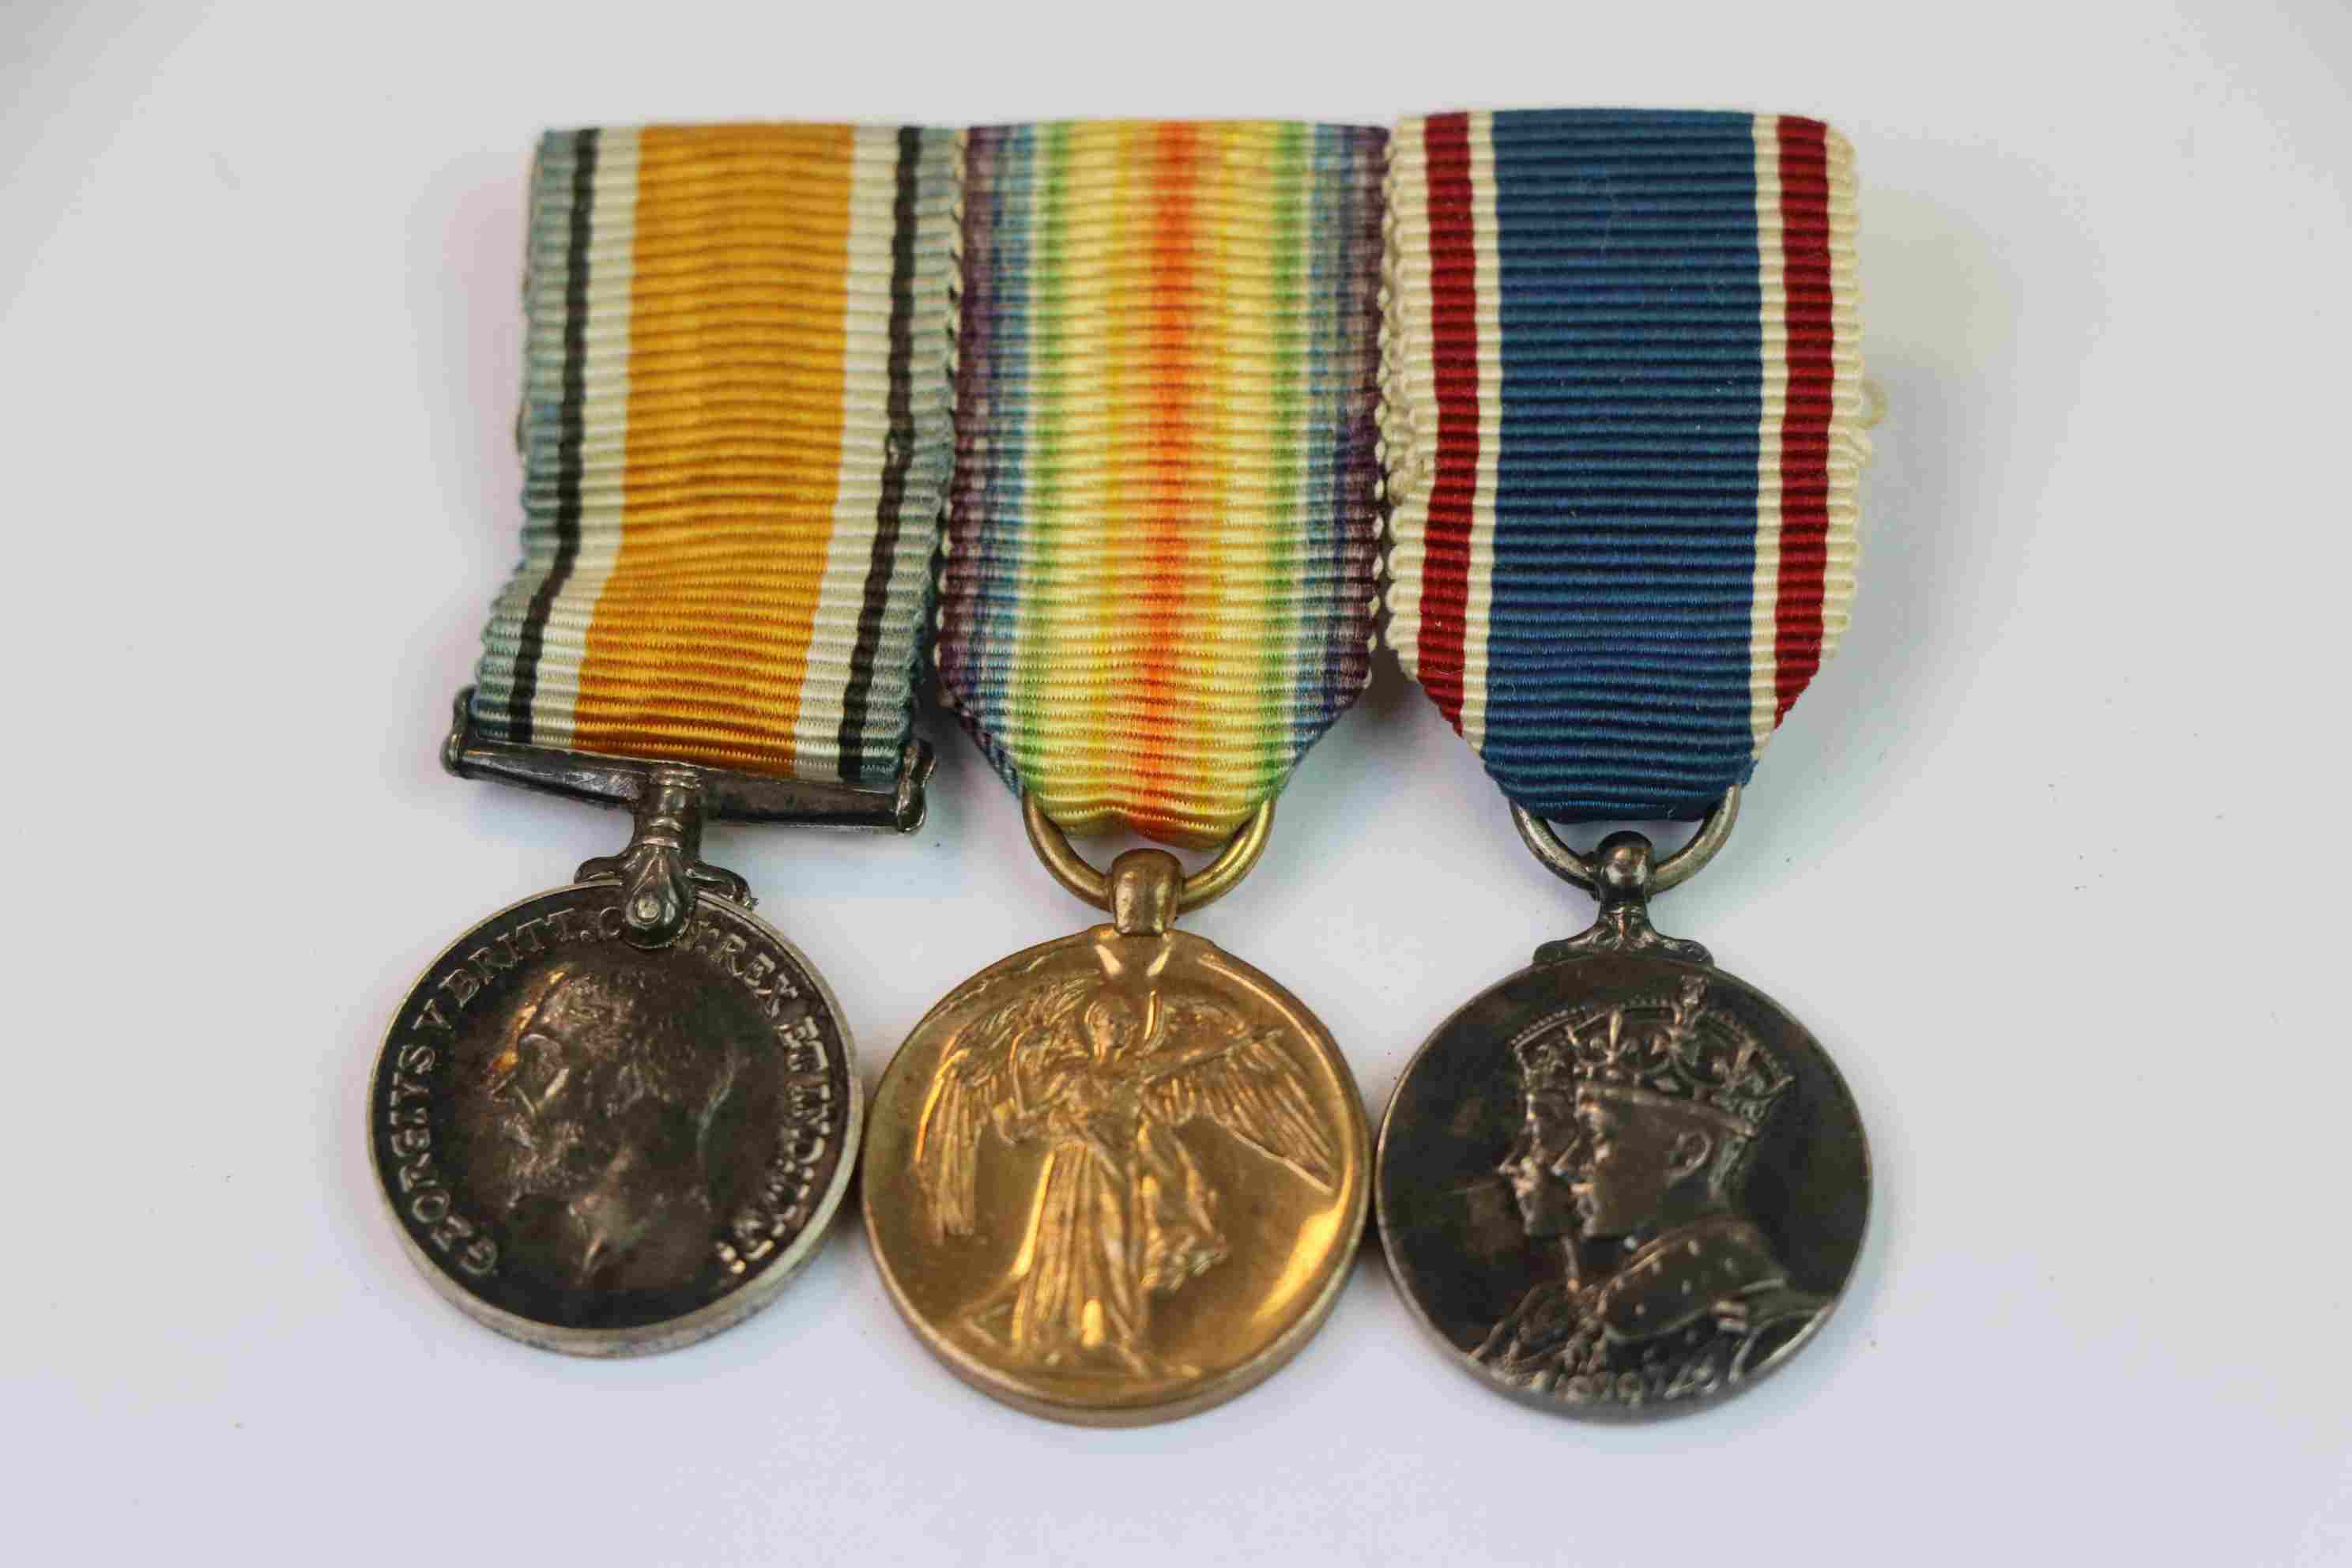 A World War One / WW1 British Miniature Medal Trio To Include The Victory Medal, The British War